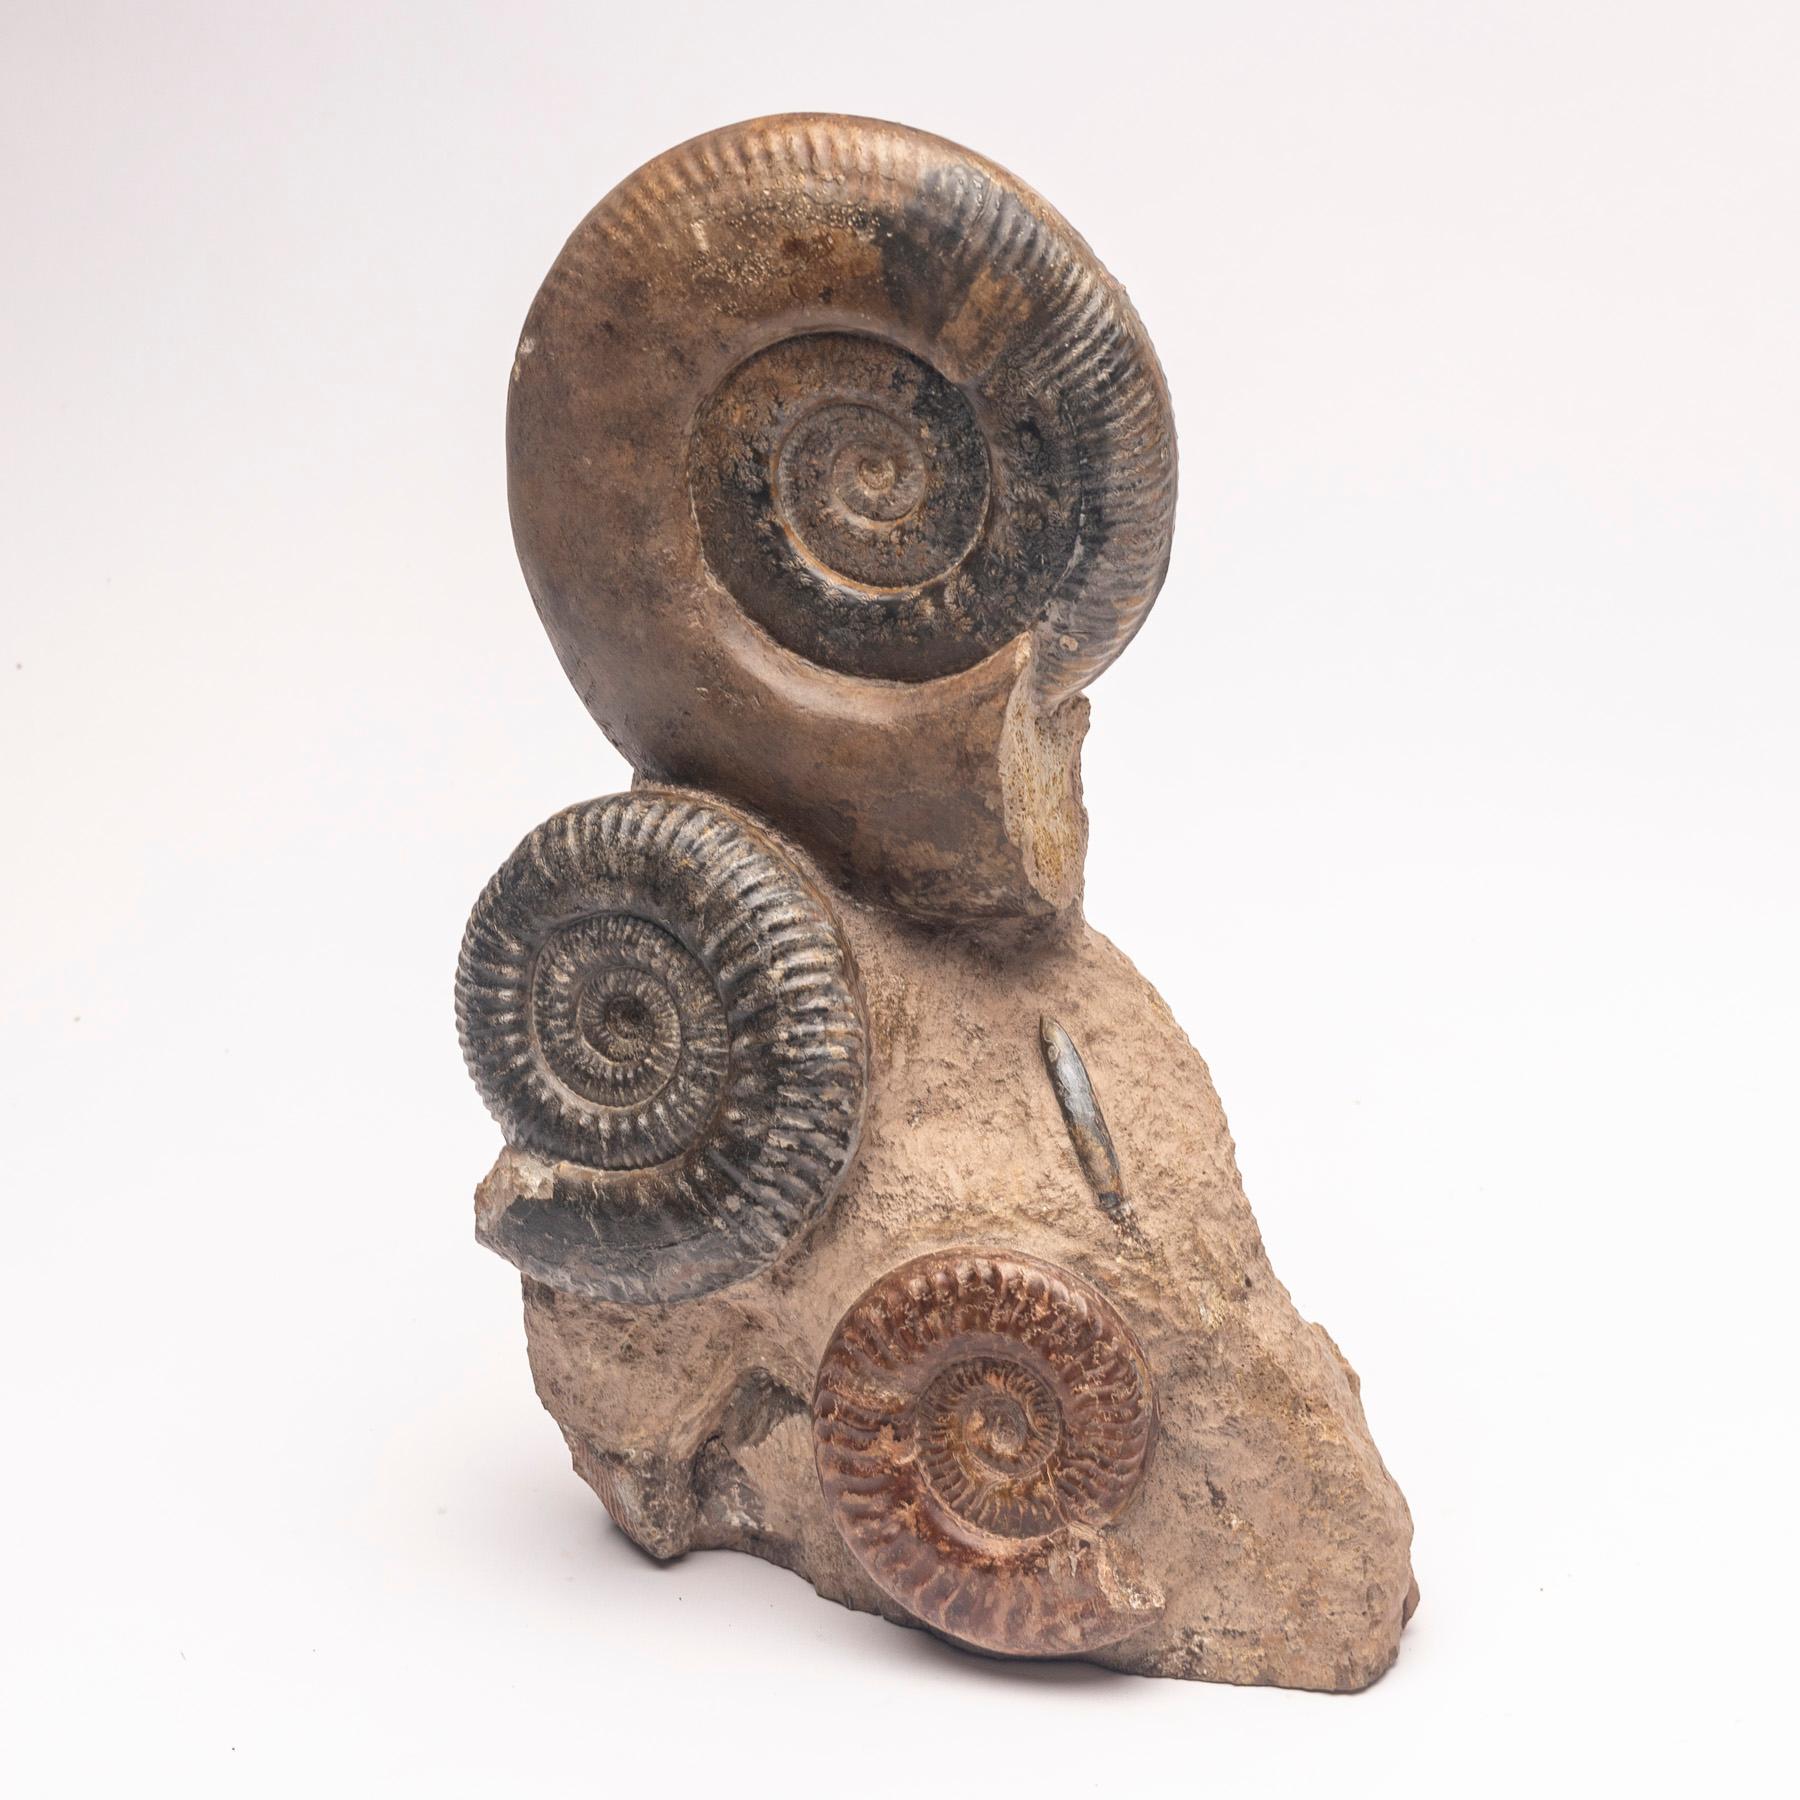 Contemporary Free Standing Fossil Ammonite Cluster from Madagascar, Cretaceous Period